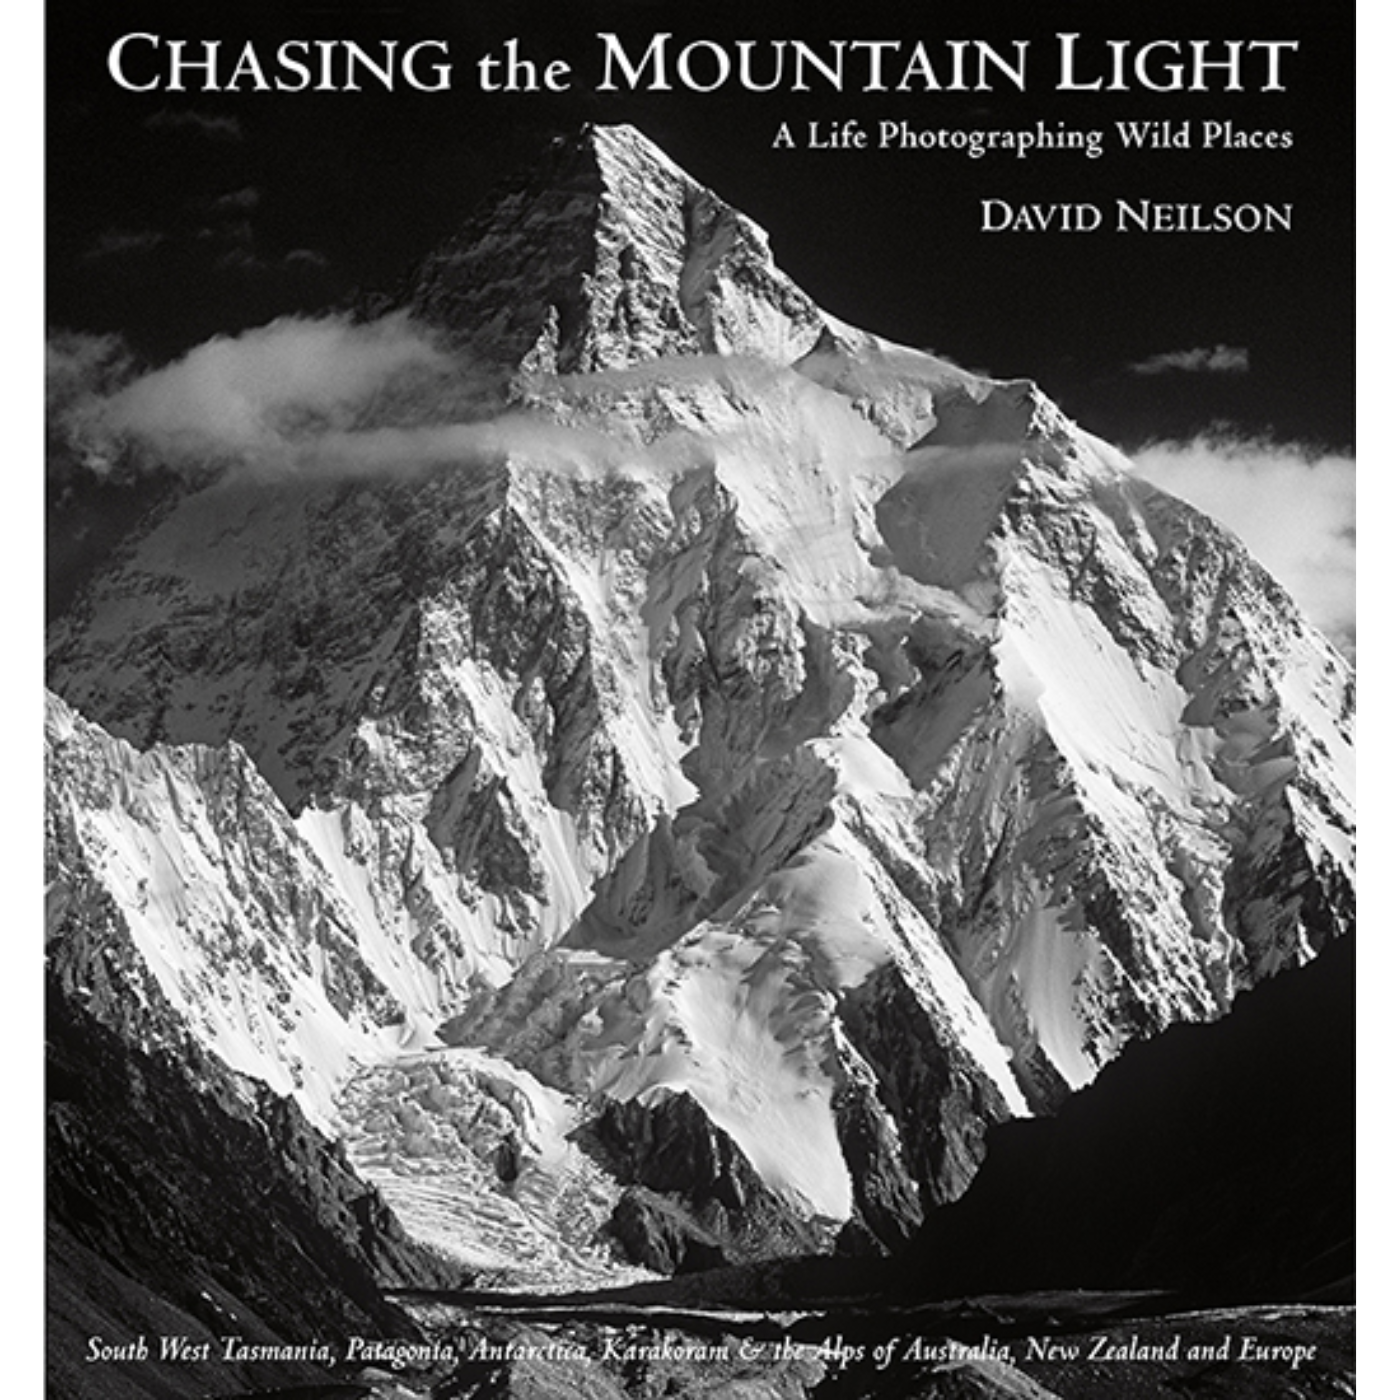 Chasing the Mountain Light